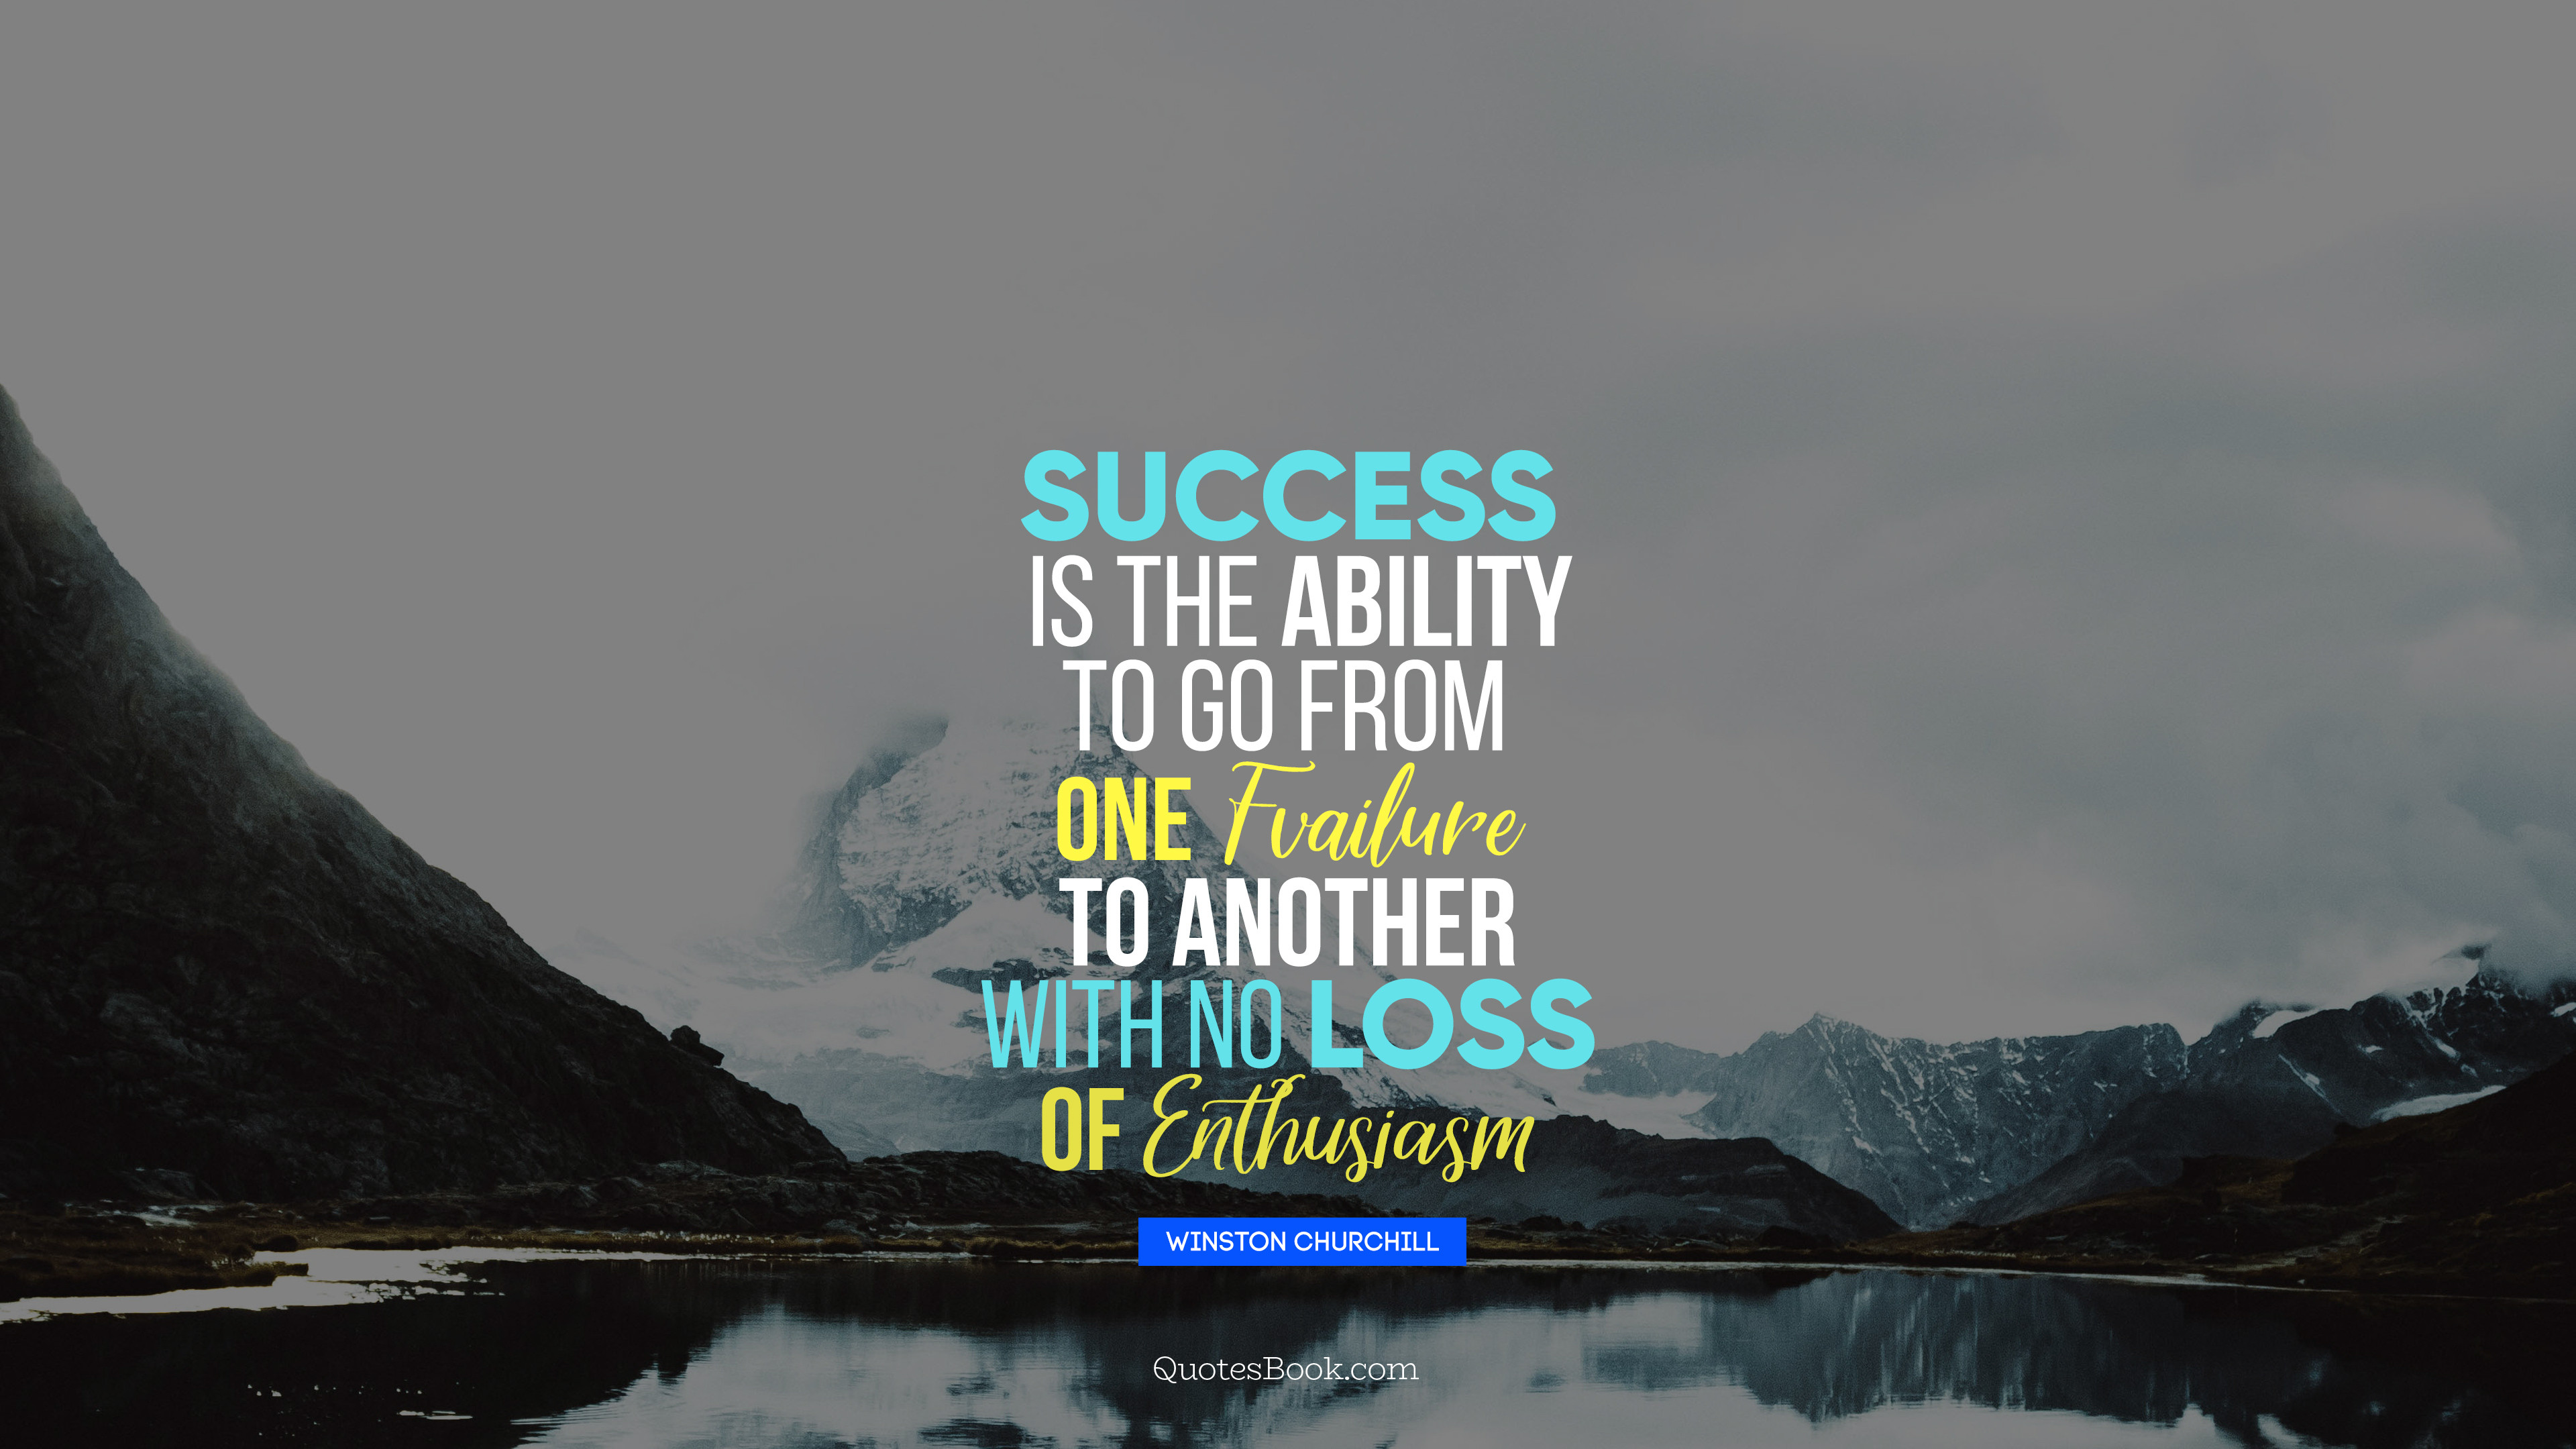 Success is the ability to go from one failure to another with no loss